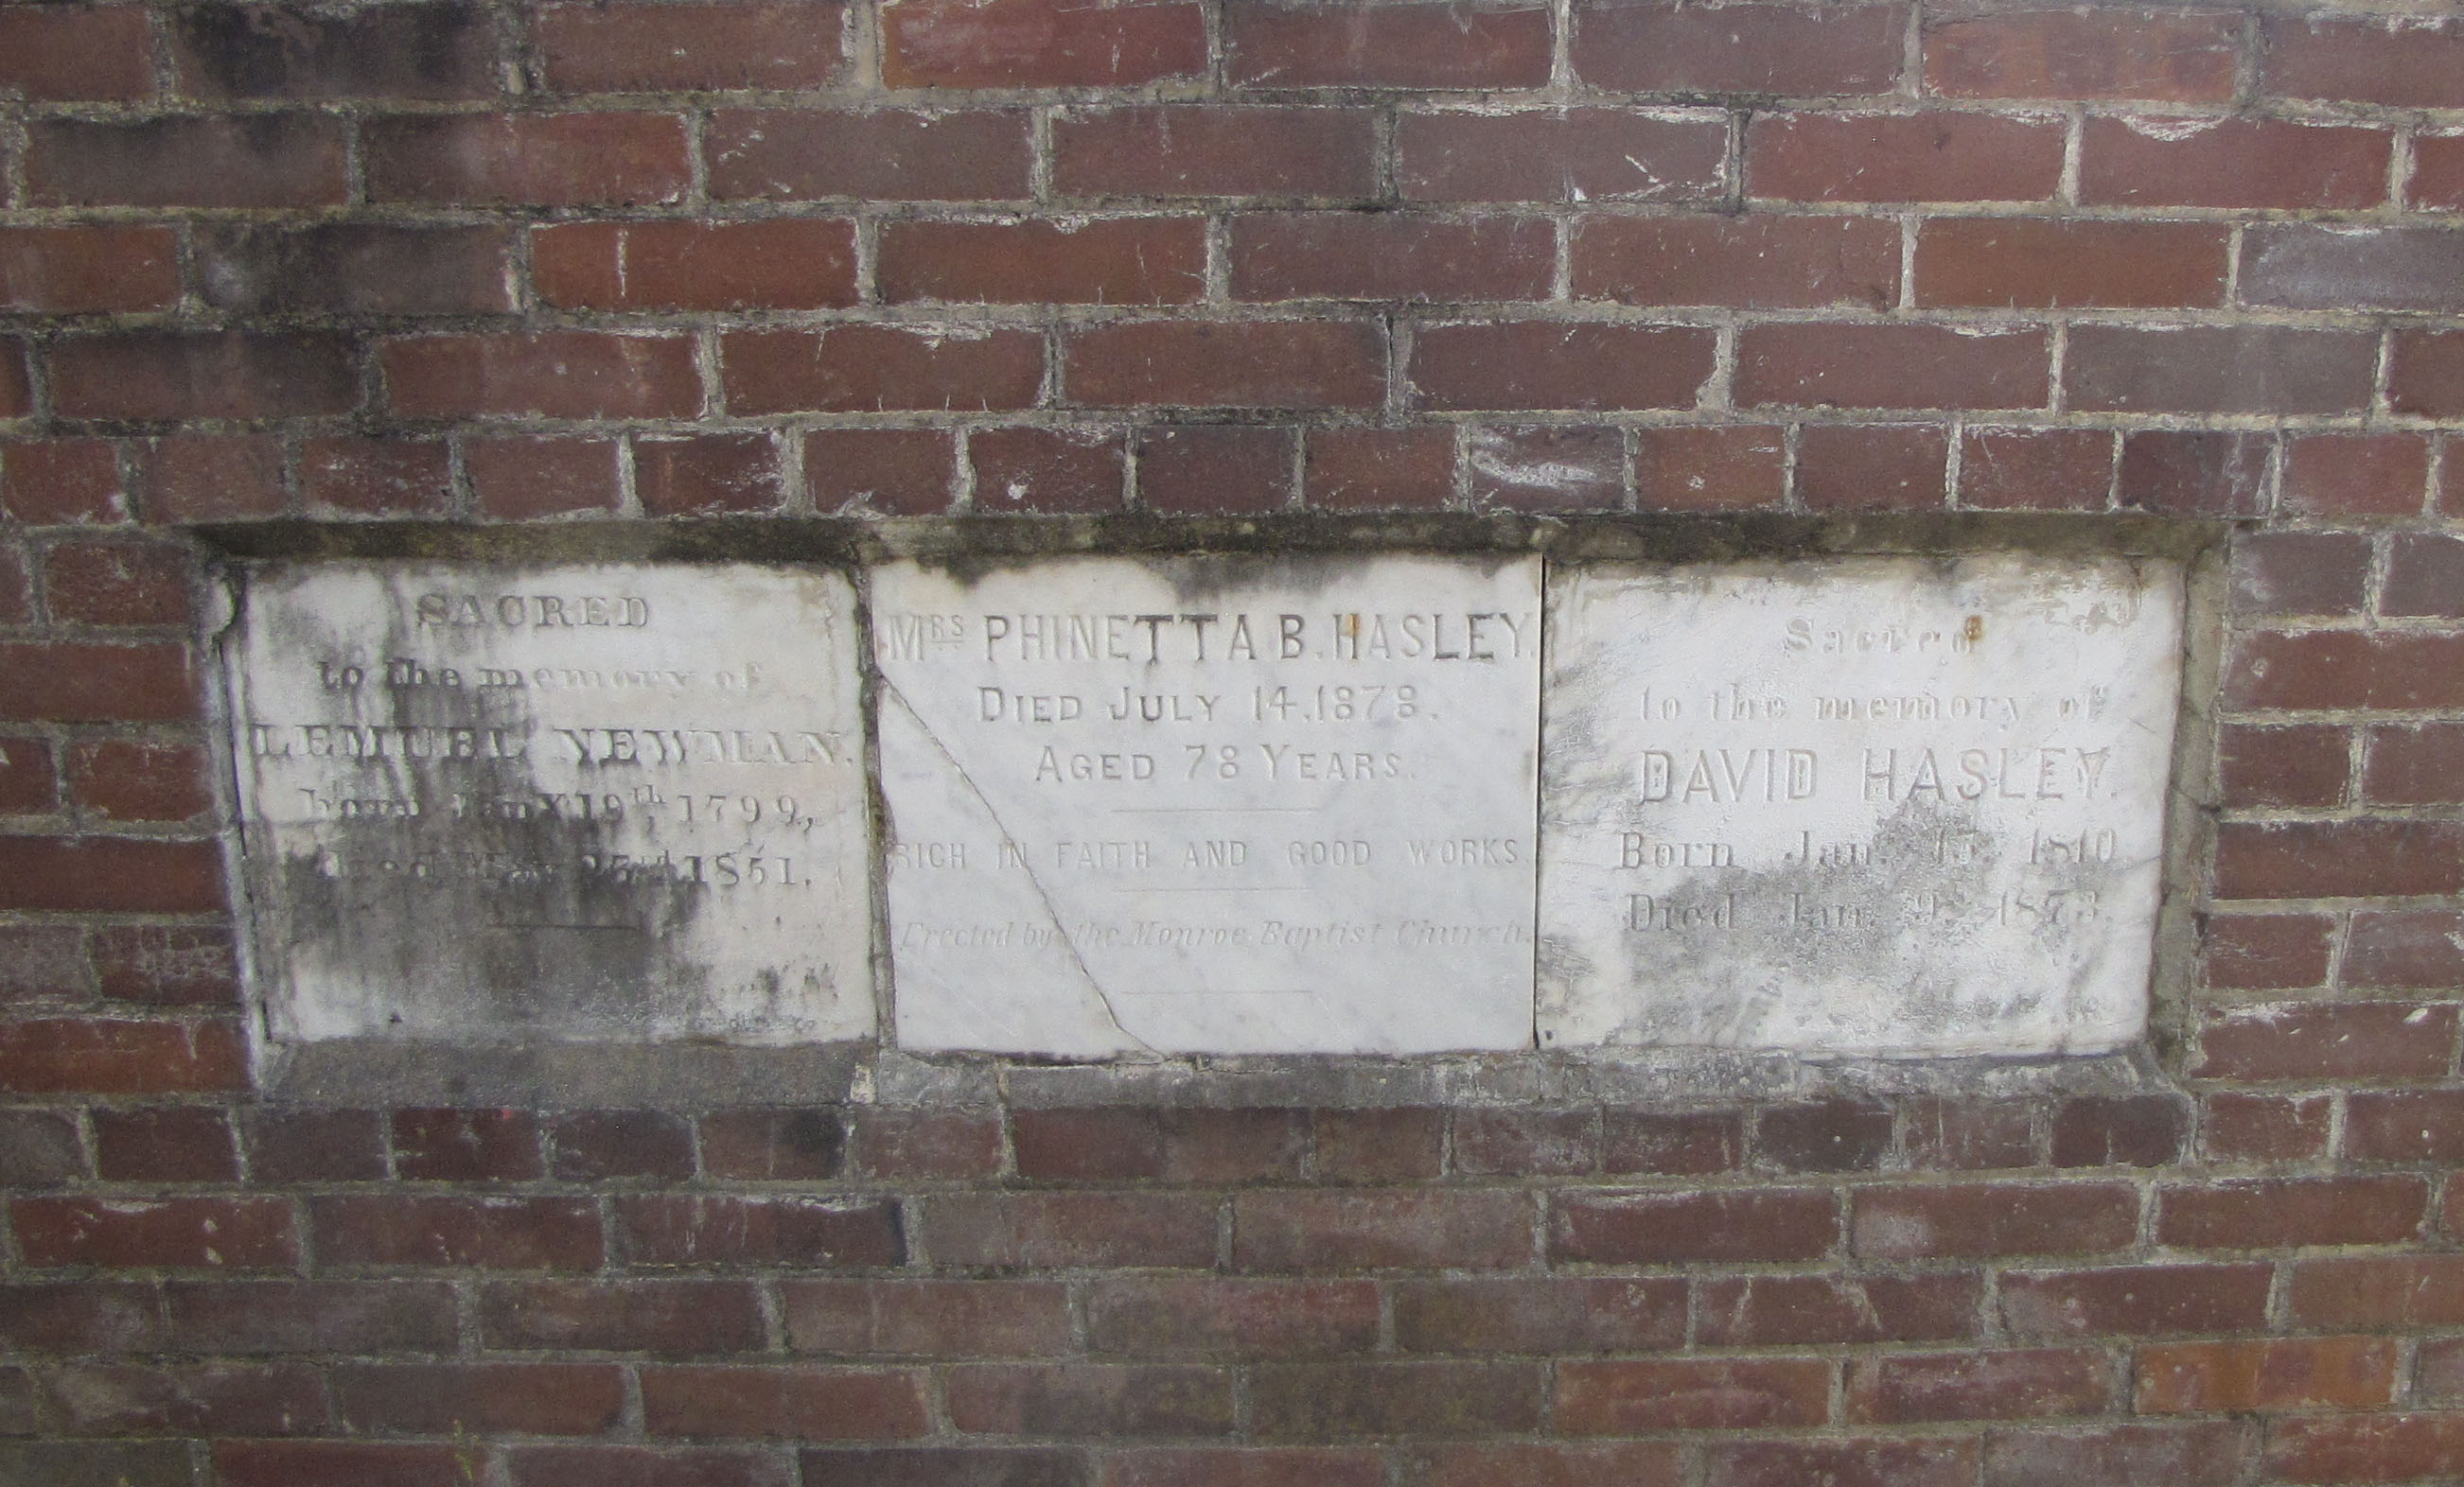 Image of marble markers for Phinetta Hasley, Lemuel Newman and David Hasley